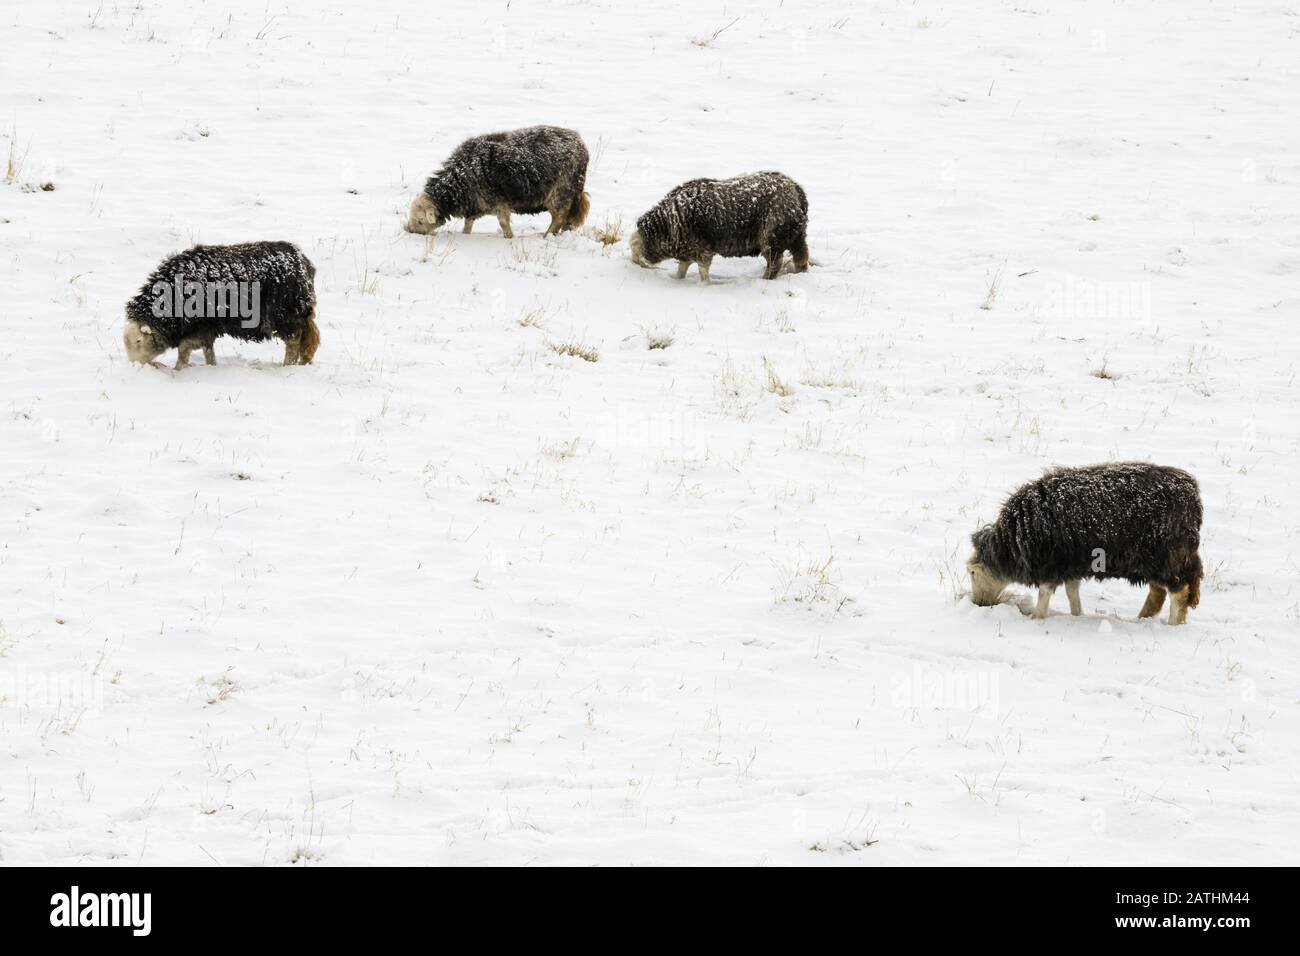 Herdwick sheep searching for food in a snow-covered farm field, Northumberland, England Stock Photo